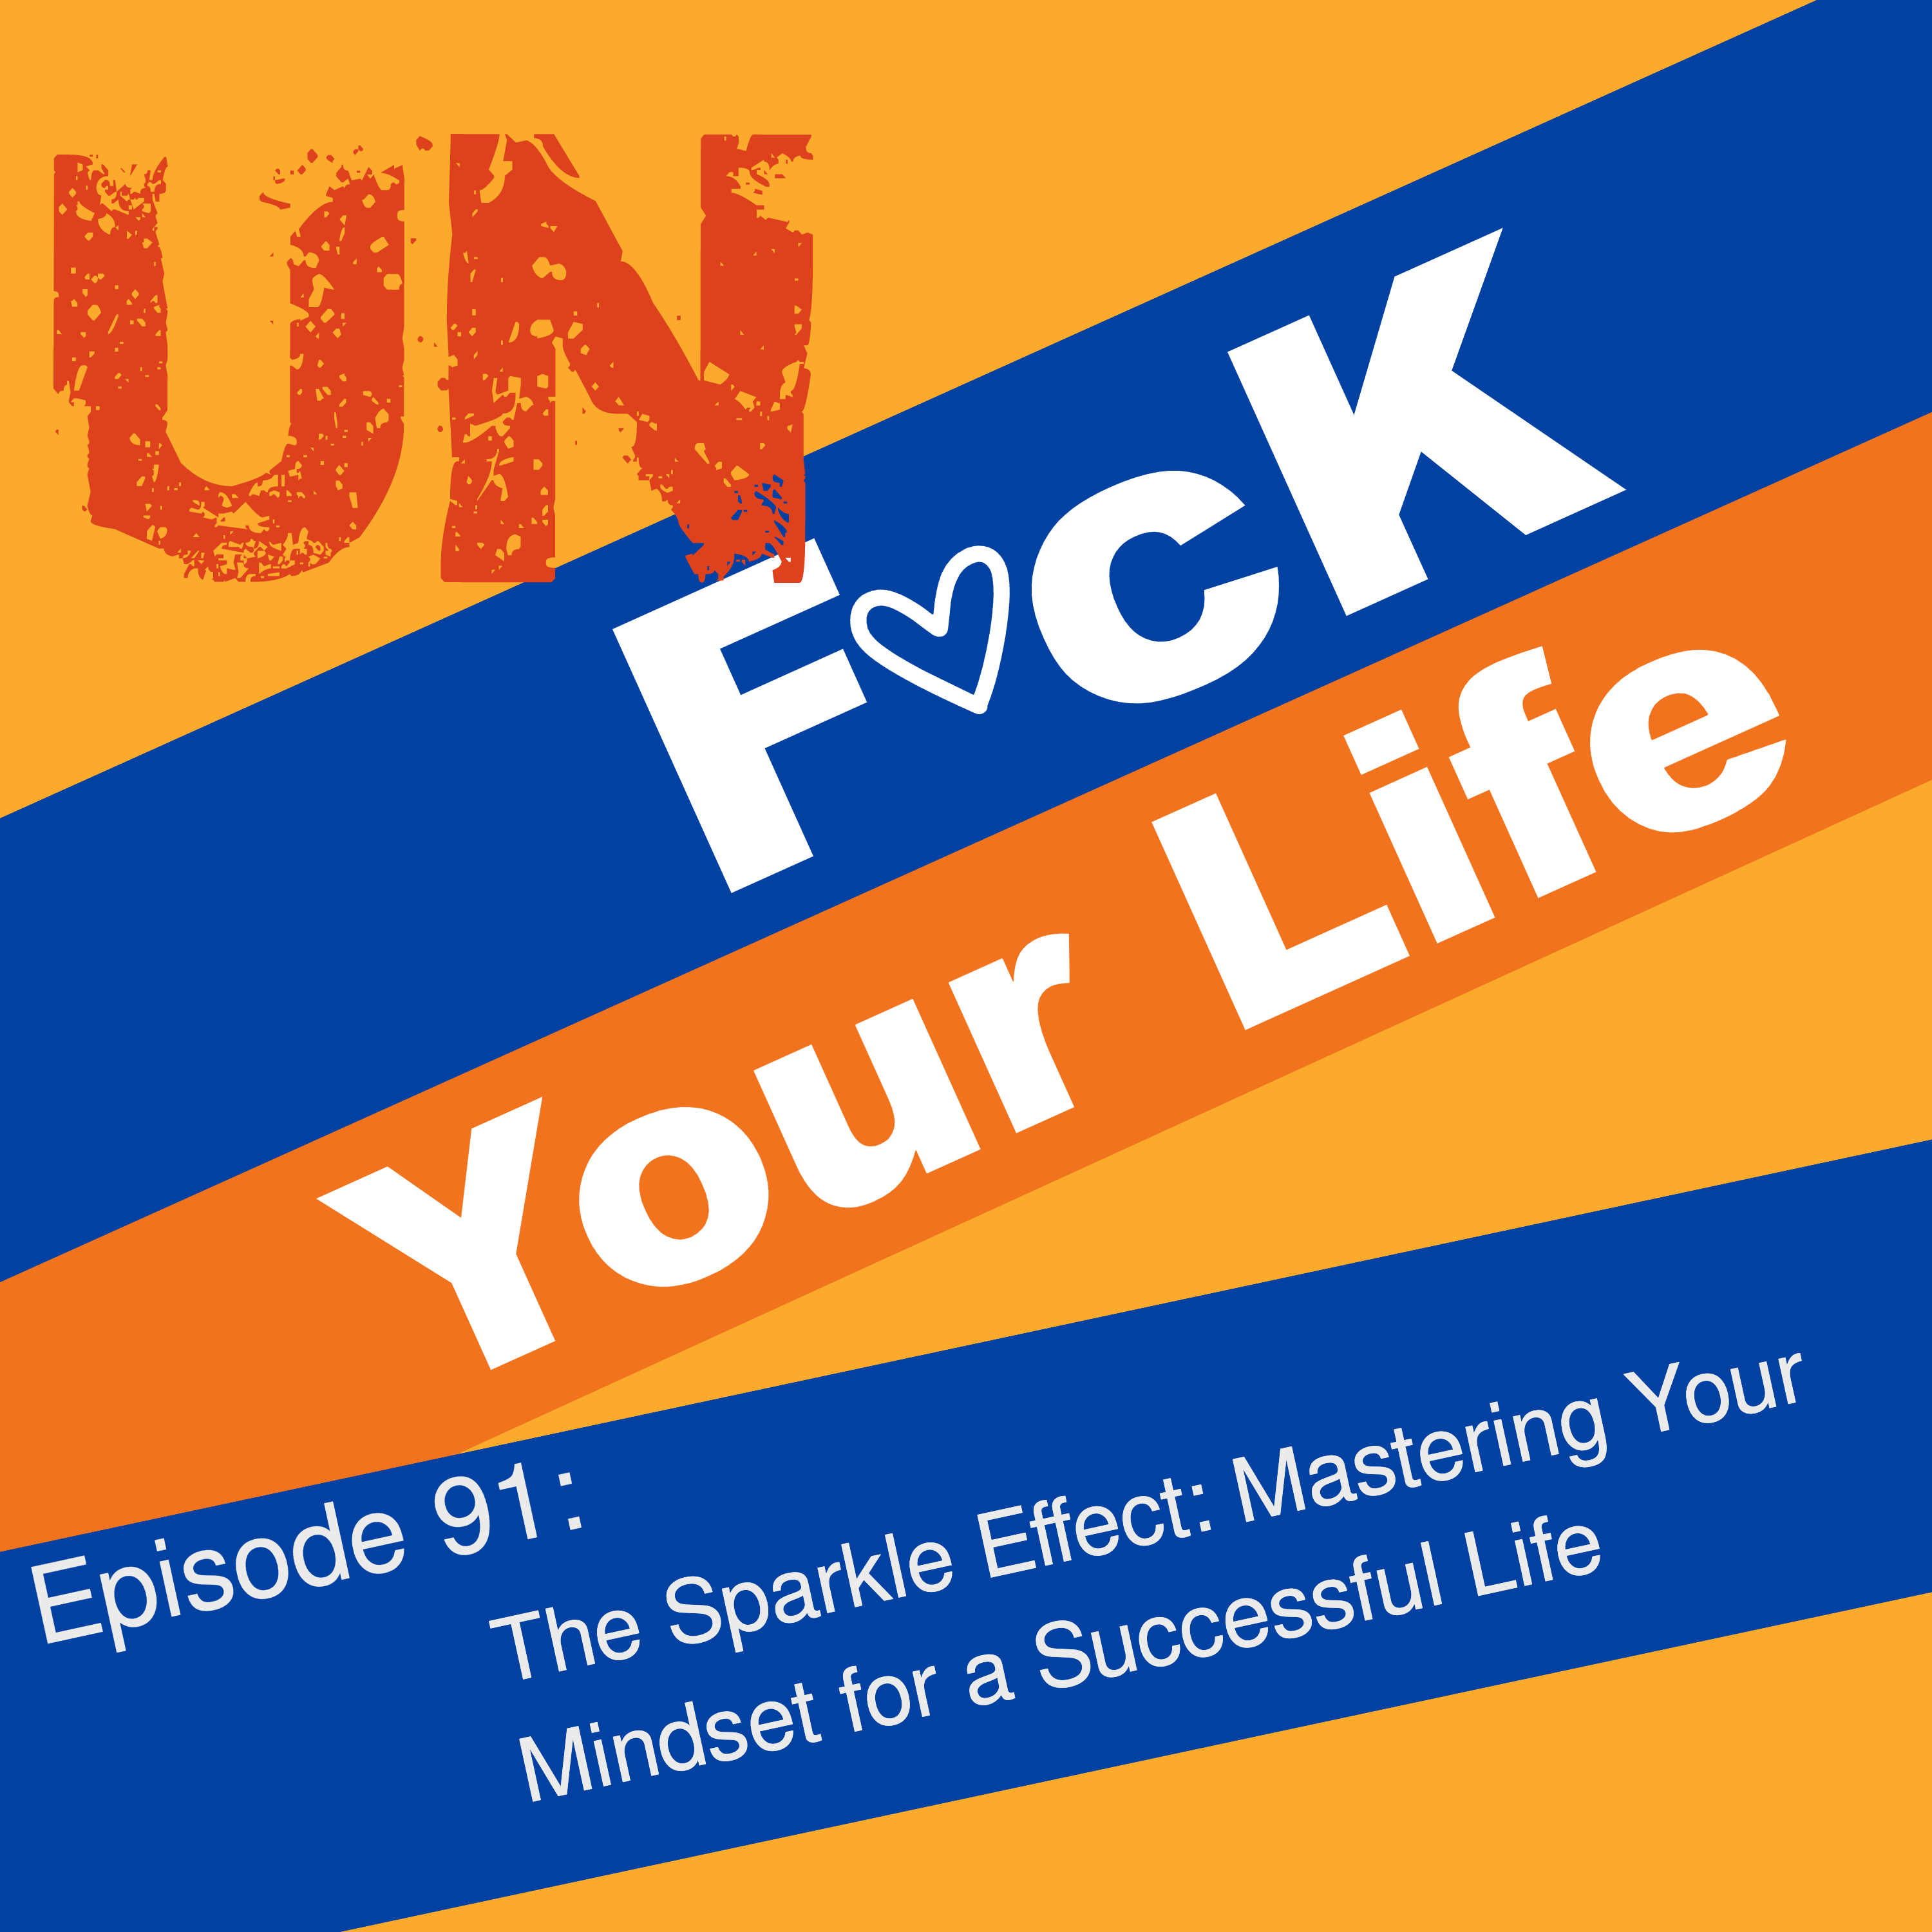 Ep 91 - The Sparkle Effect: Mastering Your Mindset for a Successful Life